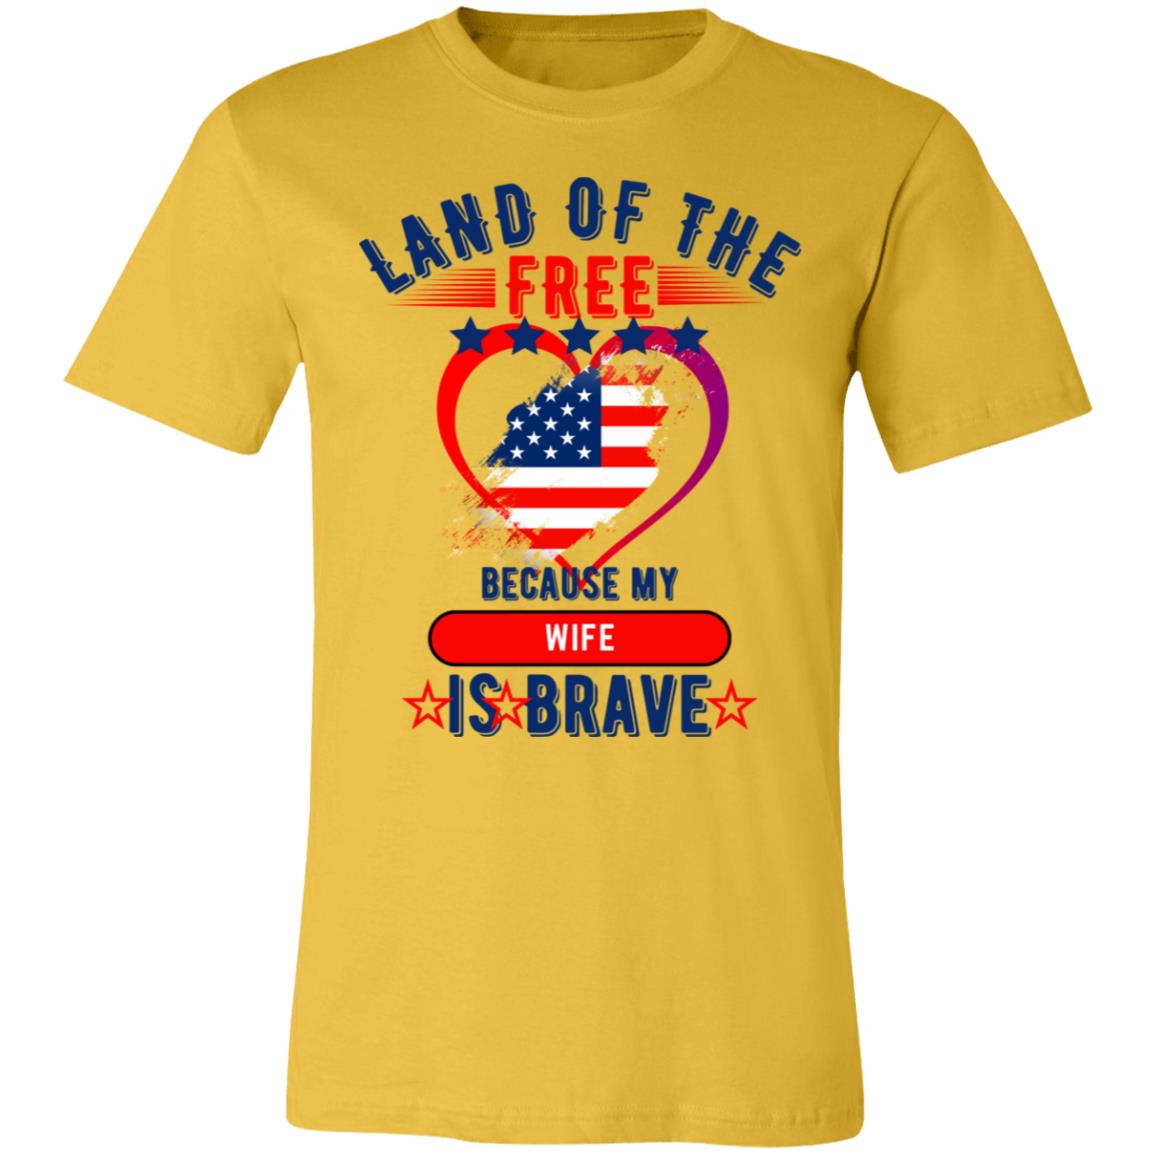 Wife Is Brave - Unisex Jersey Short-Sleeve T-Shirt